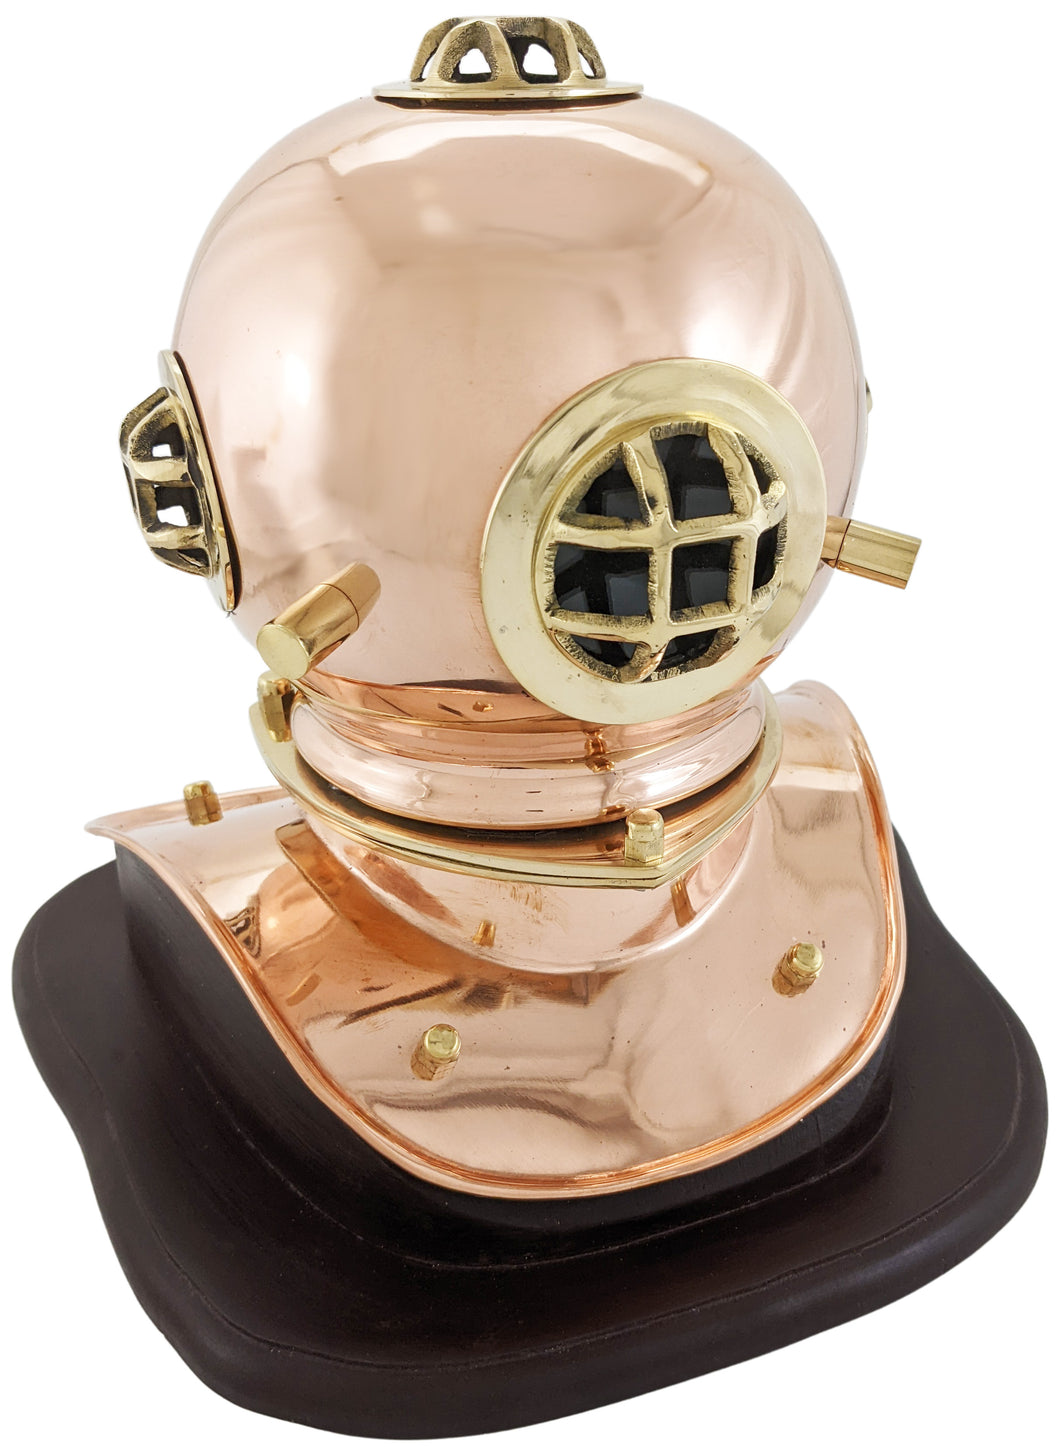 8 Inch Solid Copper and Brass Miniature Replica 1941 U.S. Navy Mark IV Diving Helmet with Wooden Display Stand, Nautical Marine Memorabilia Decoration